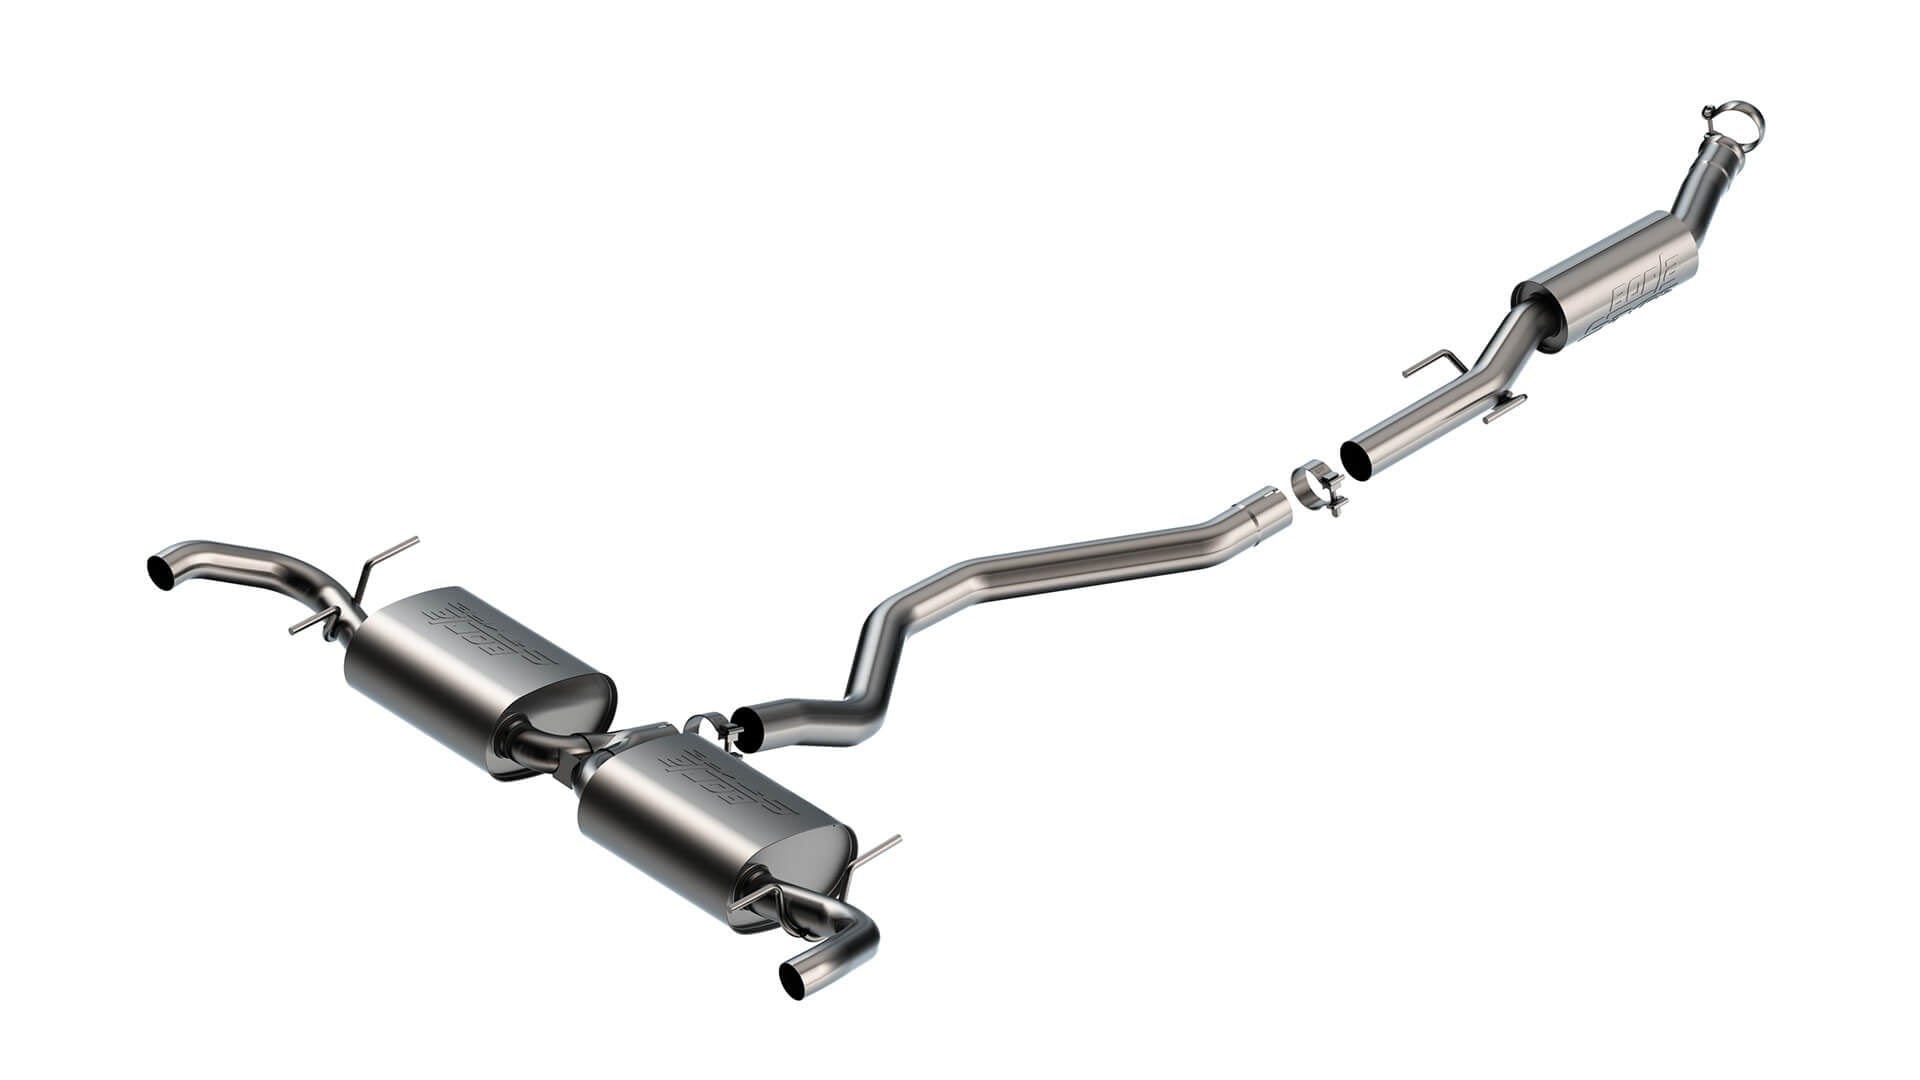 BORLA 140933 Exhaust System Cat-Back "S-TYPE" 2.75" W/O TIPS SR for JEEP GRAND CHEROKEE 4XE '22-'24 2.0L i4 AT AWD 4DR Photo-1 